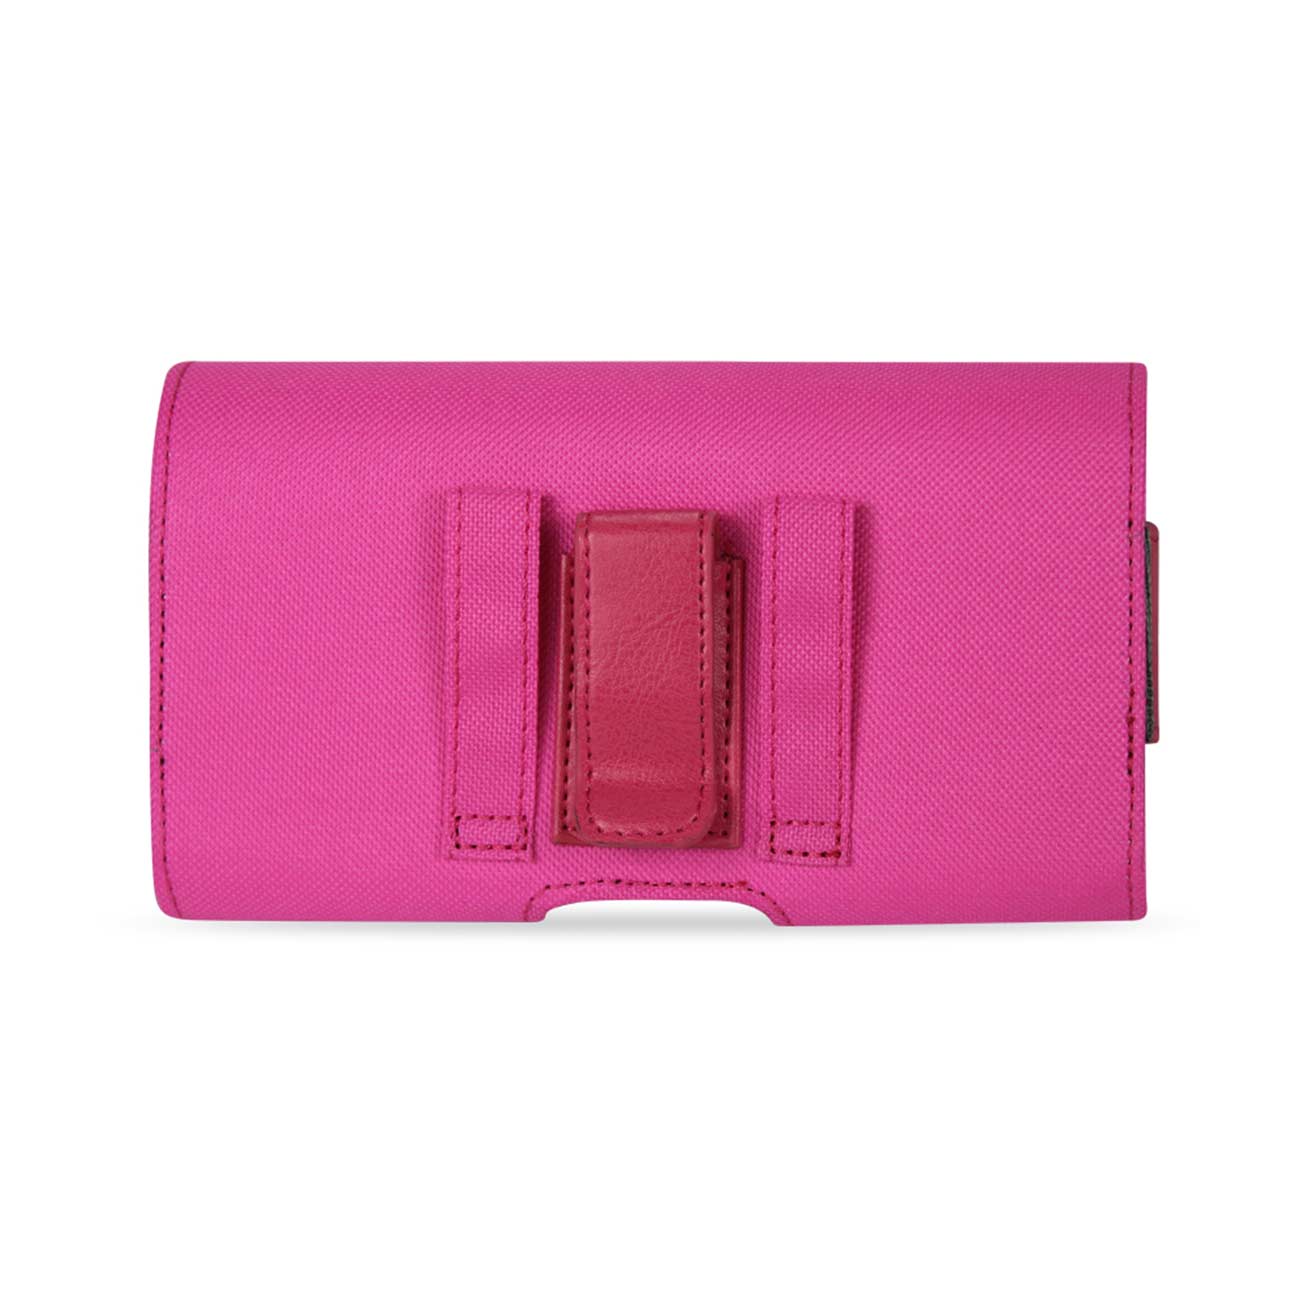 Pouch/ Phone Holster Rugged Horizontal With Z Lid Pattern Hot Pink Color